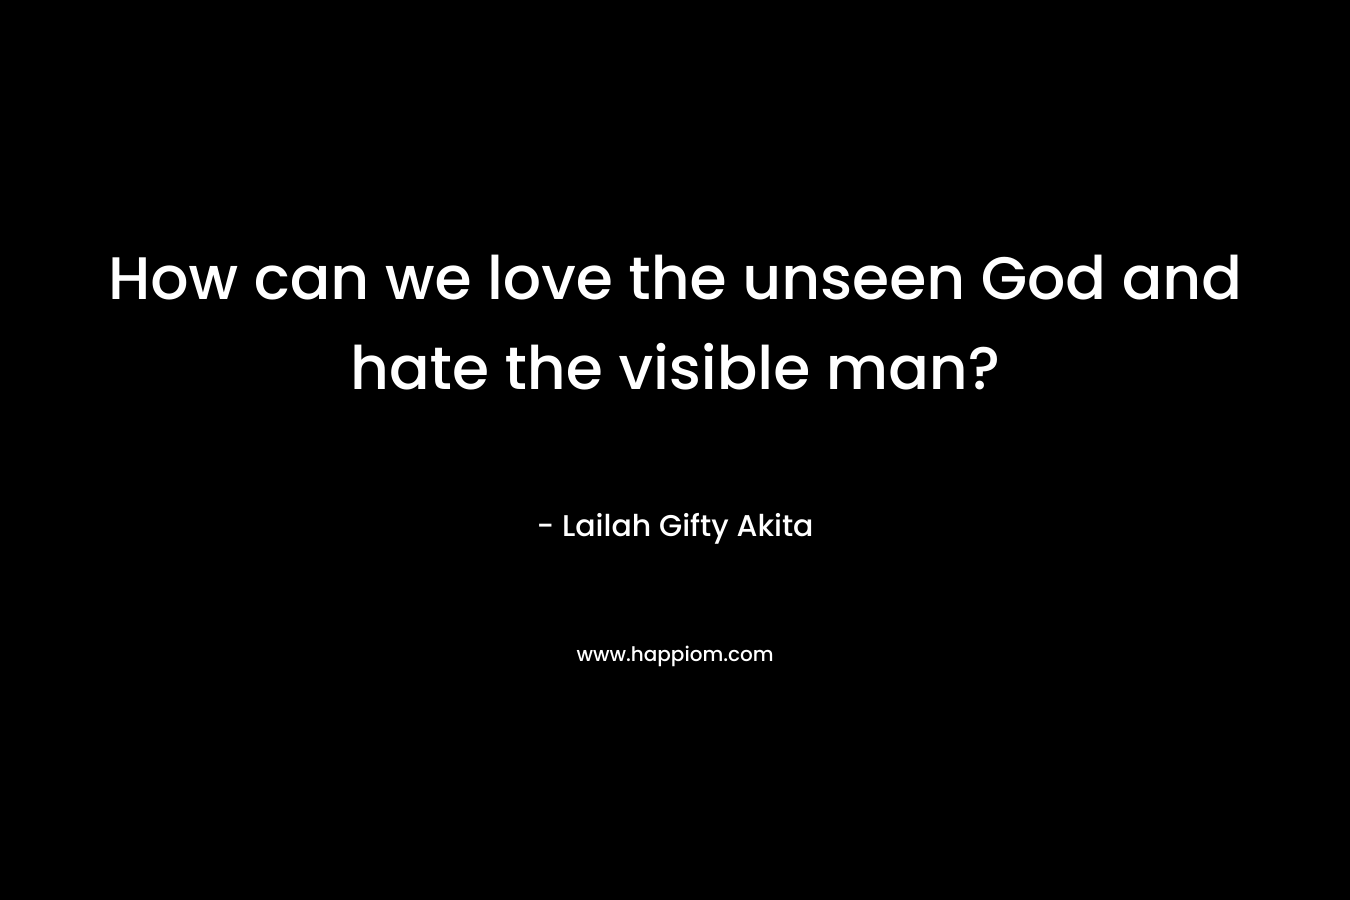 How can we love the unseen God and hate the visible man?